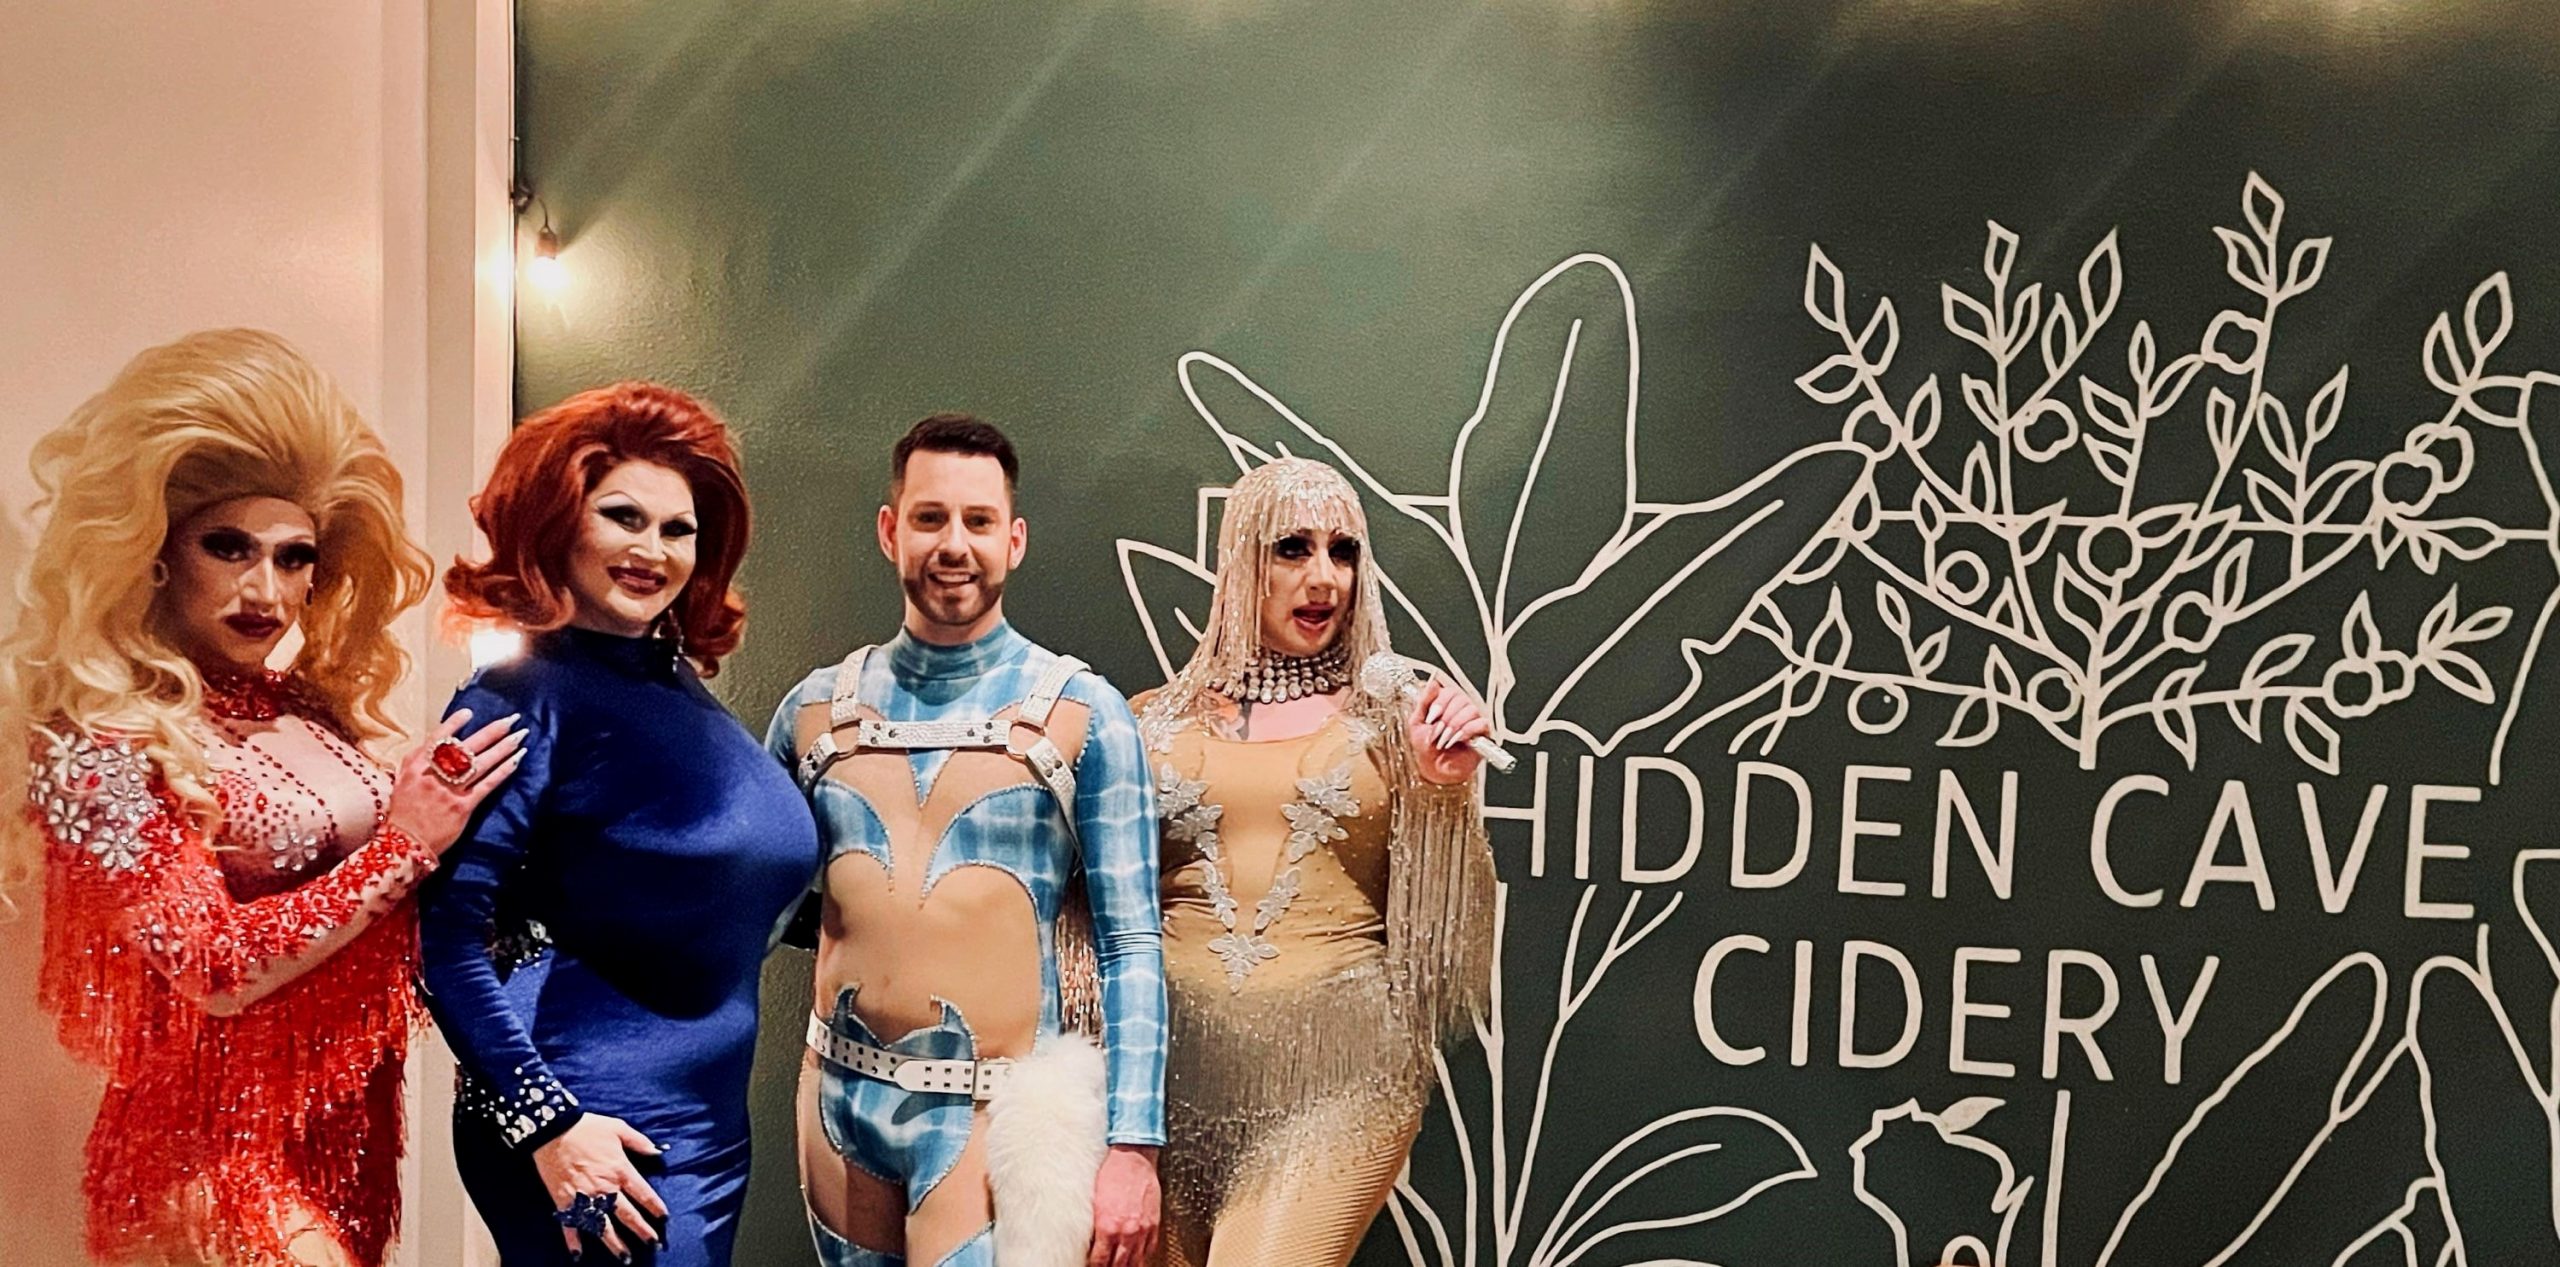 A group of people standing in front of a sign that says hidden cave cidery.